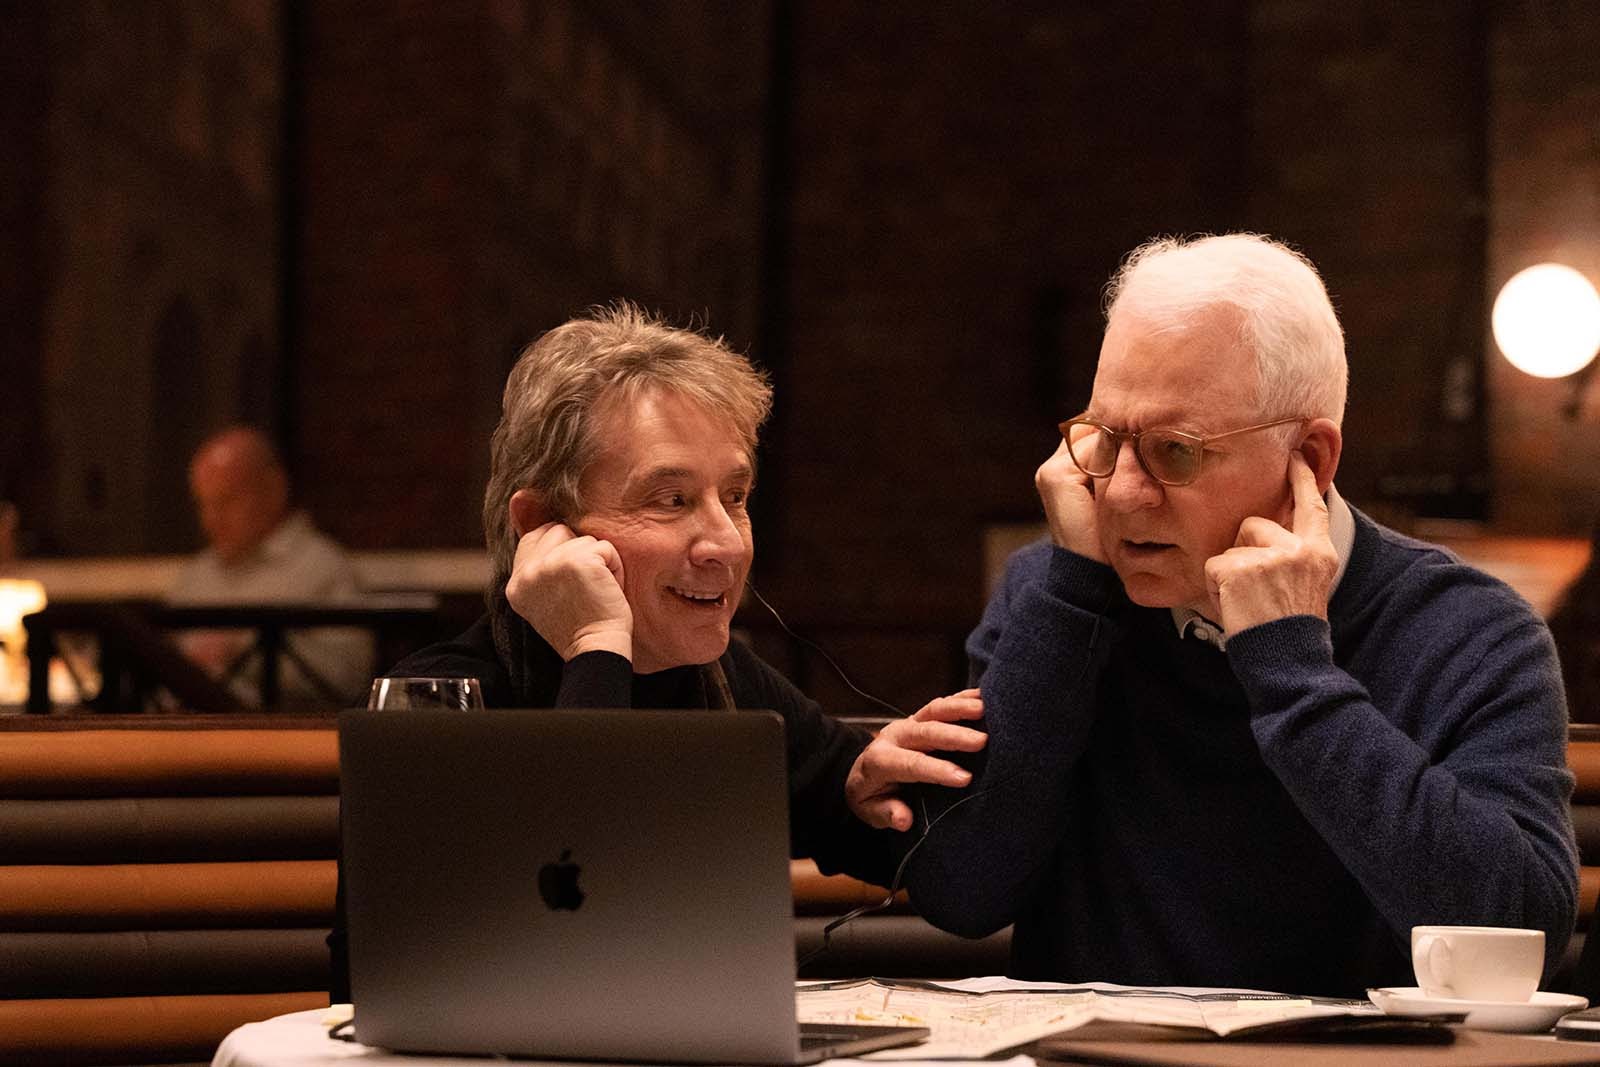 Oliver Putnam (Martin Short) and Charles-Haden Savage (Steve Martin) listen to audio evidence in Only Murders in the Building. Image © Hulu